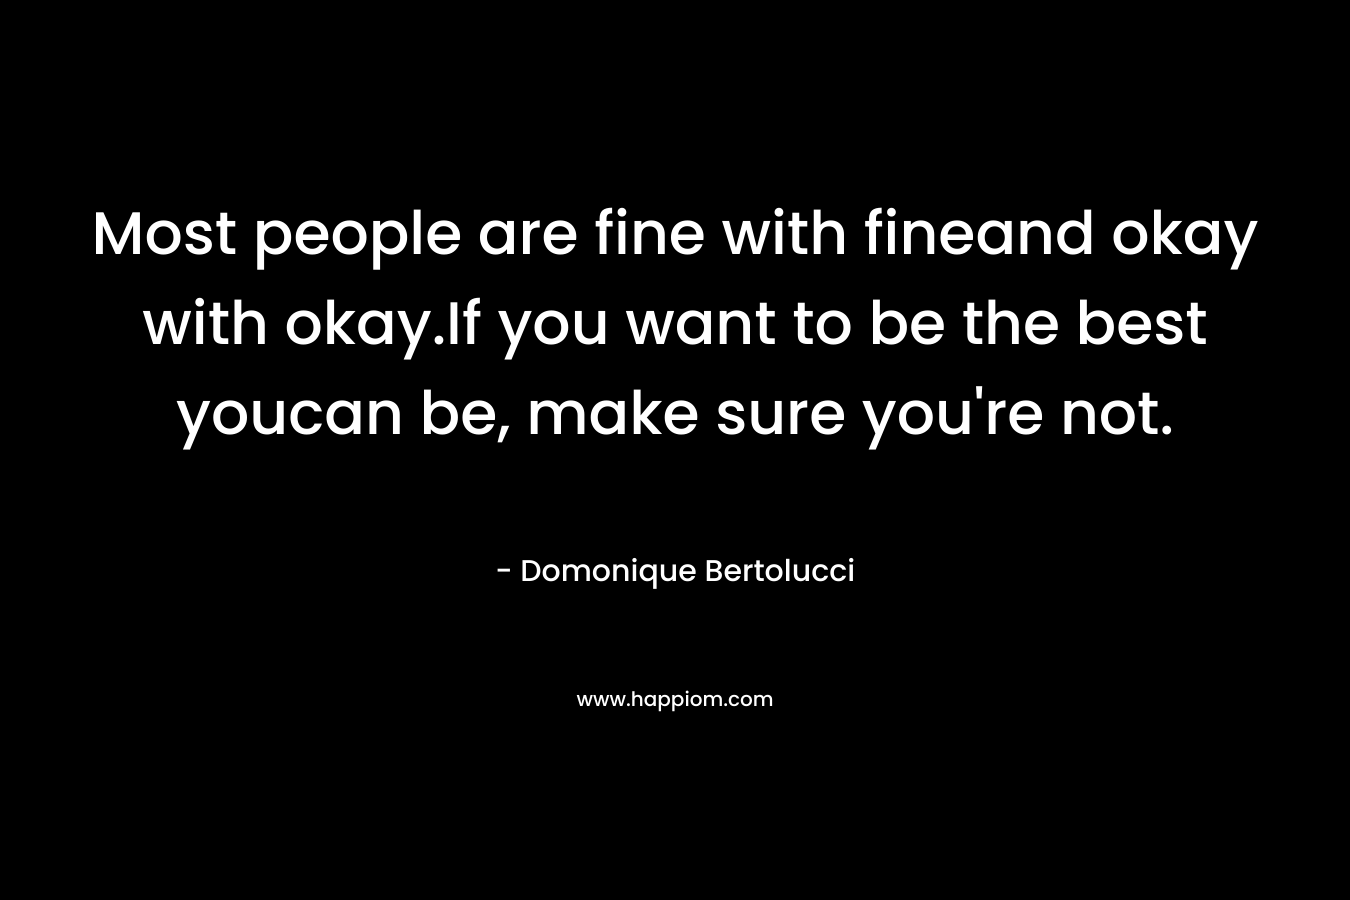 Most people are fine with fineand okay with okay.If you want to be the best youcan be, make sure you’re not. – Domonique Bertolucci